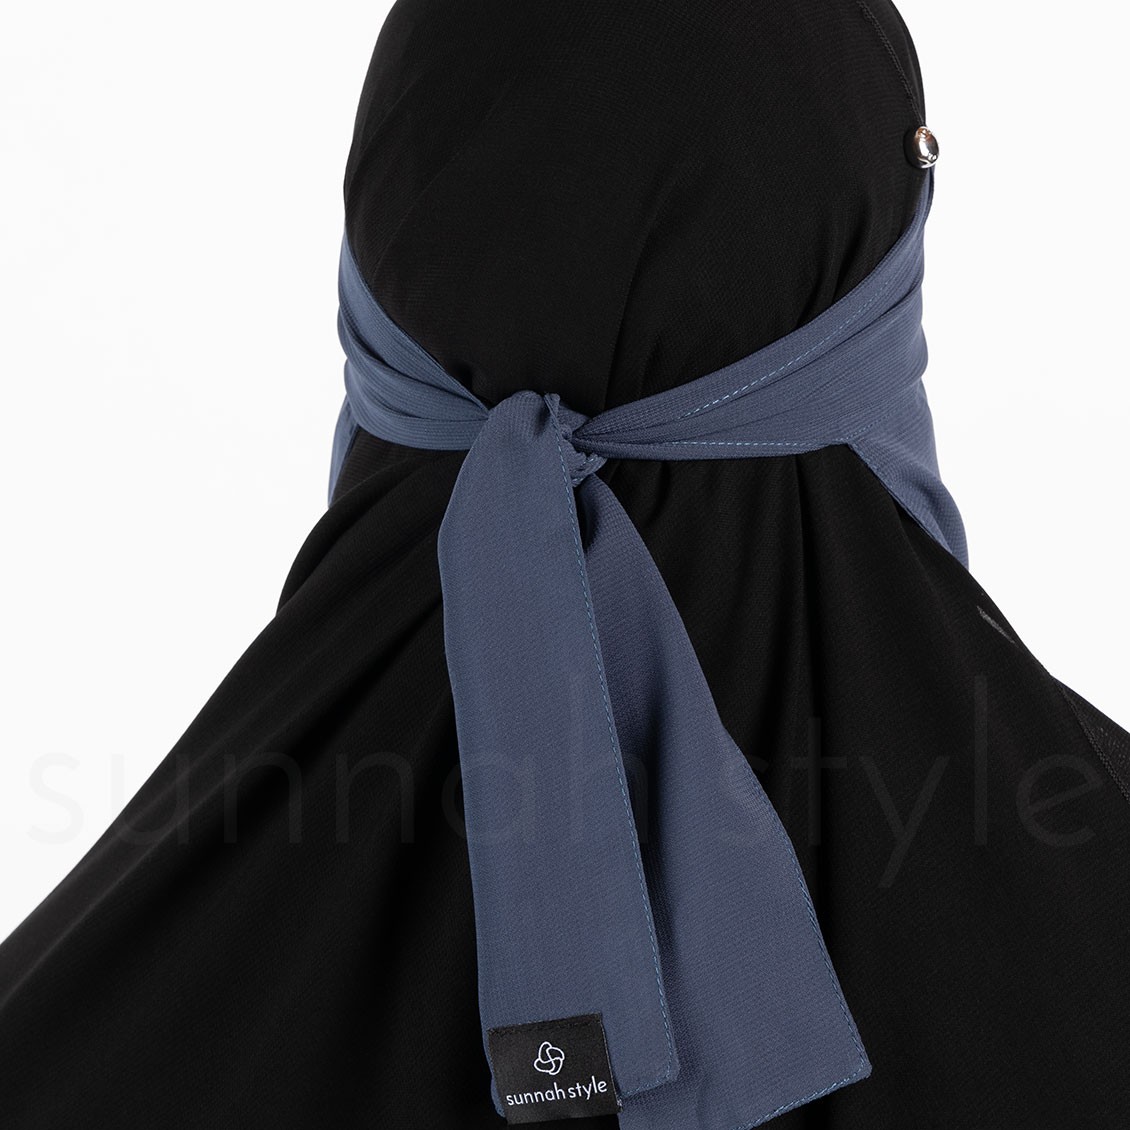 Sunnah Style Long One Layer Niqab Steel Blue